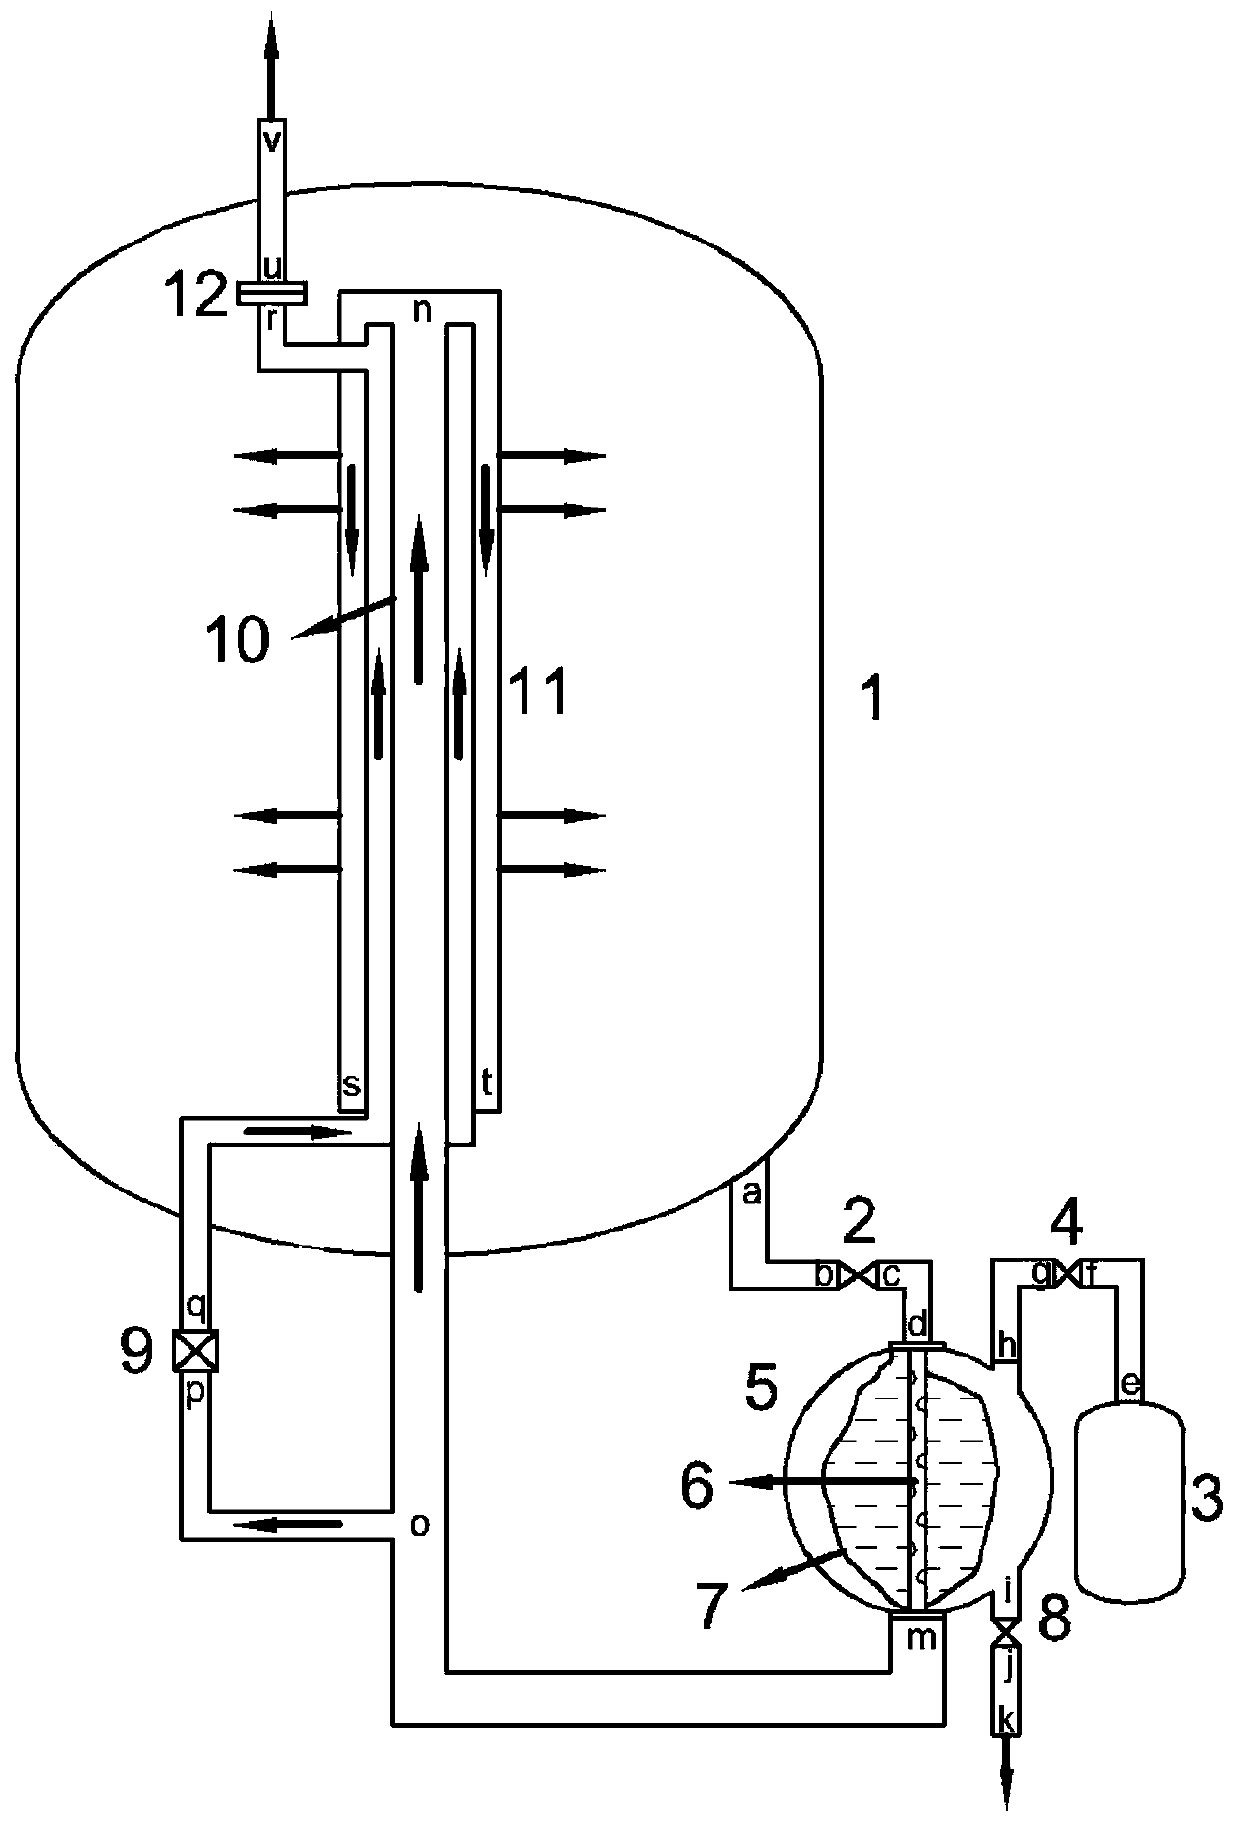 A thermodynamic exhaust system for cryogenic propellant space on-orbit extrusion separation